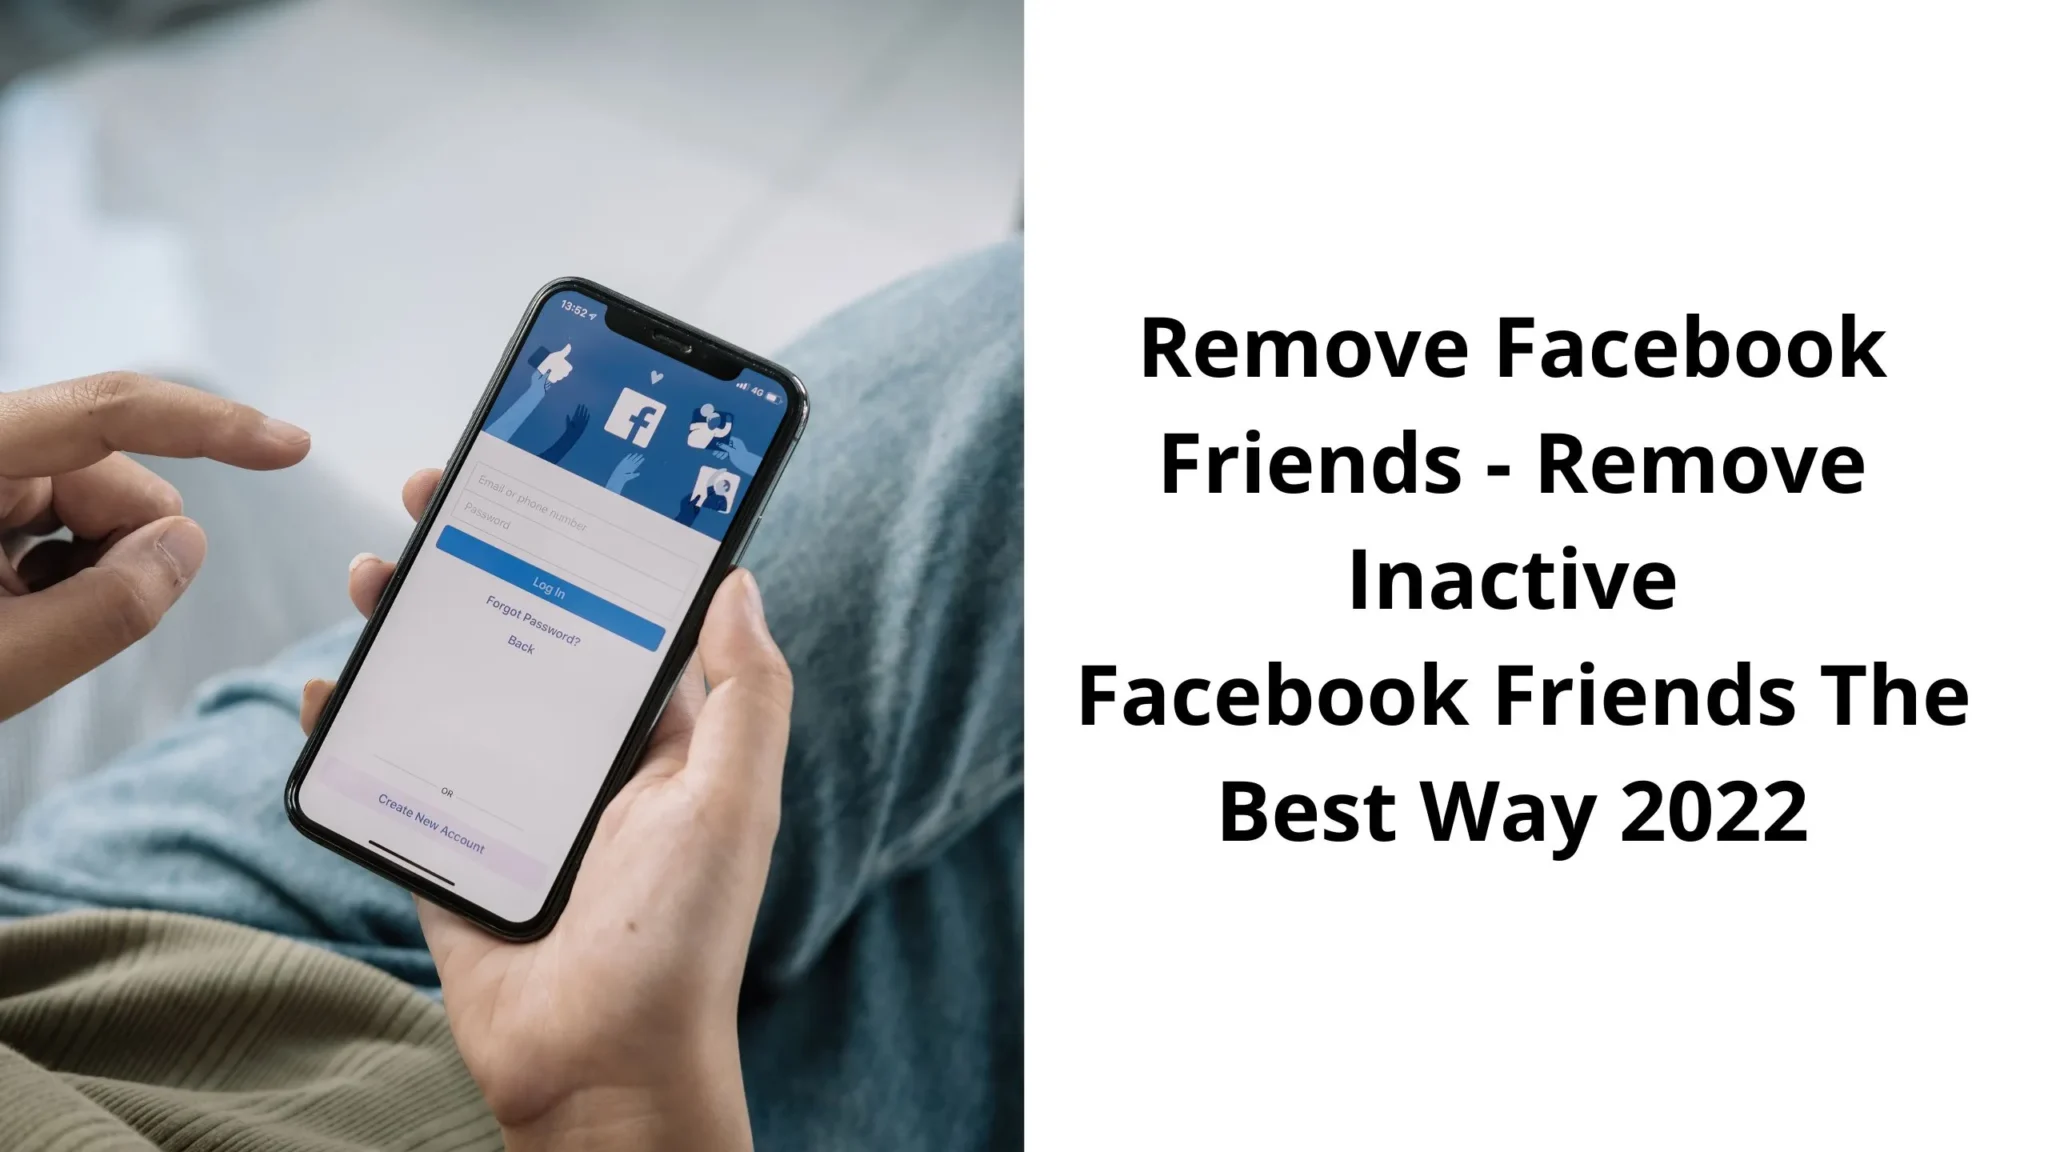 Remove Facebook Friends - Remove Inactive Facebook Friends The Best Way 2022